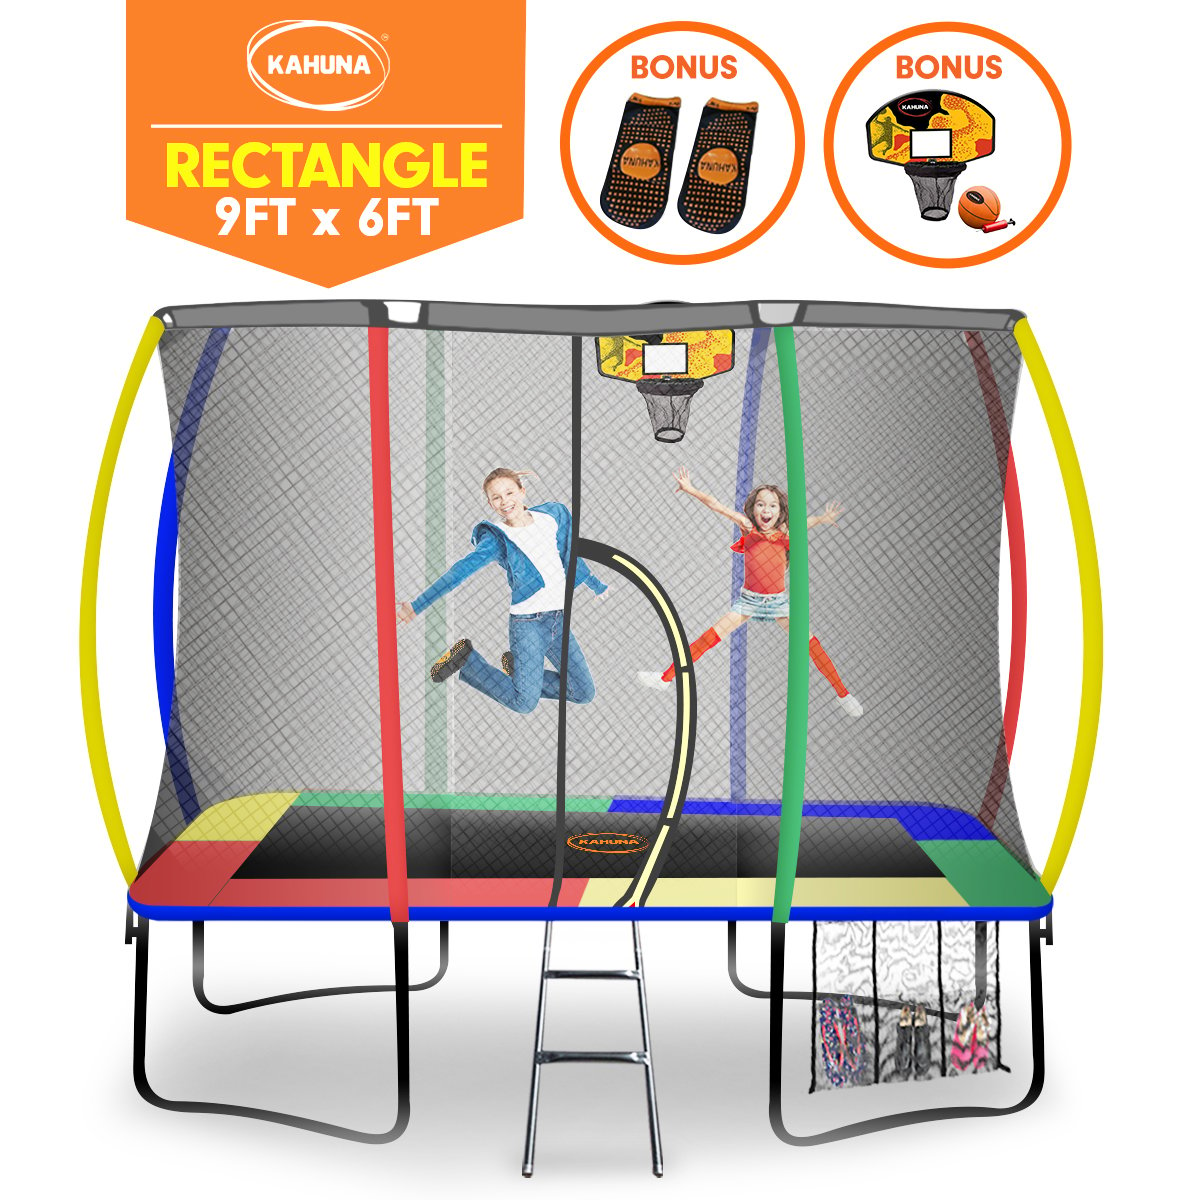 Kahuna 6ft X 9ft Outdoor Rectangular Rainbow Trampoline Safety Enclosure And Basketball Hoop Set - SILBERSHELL